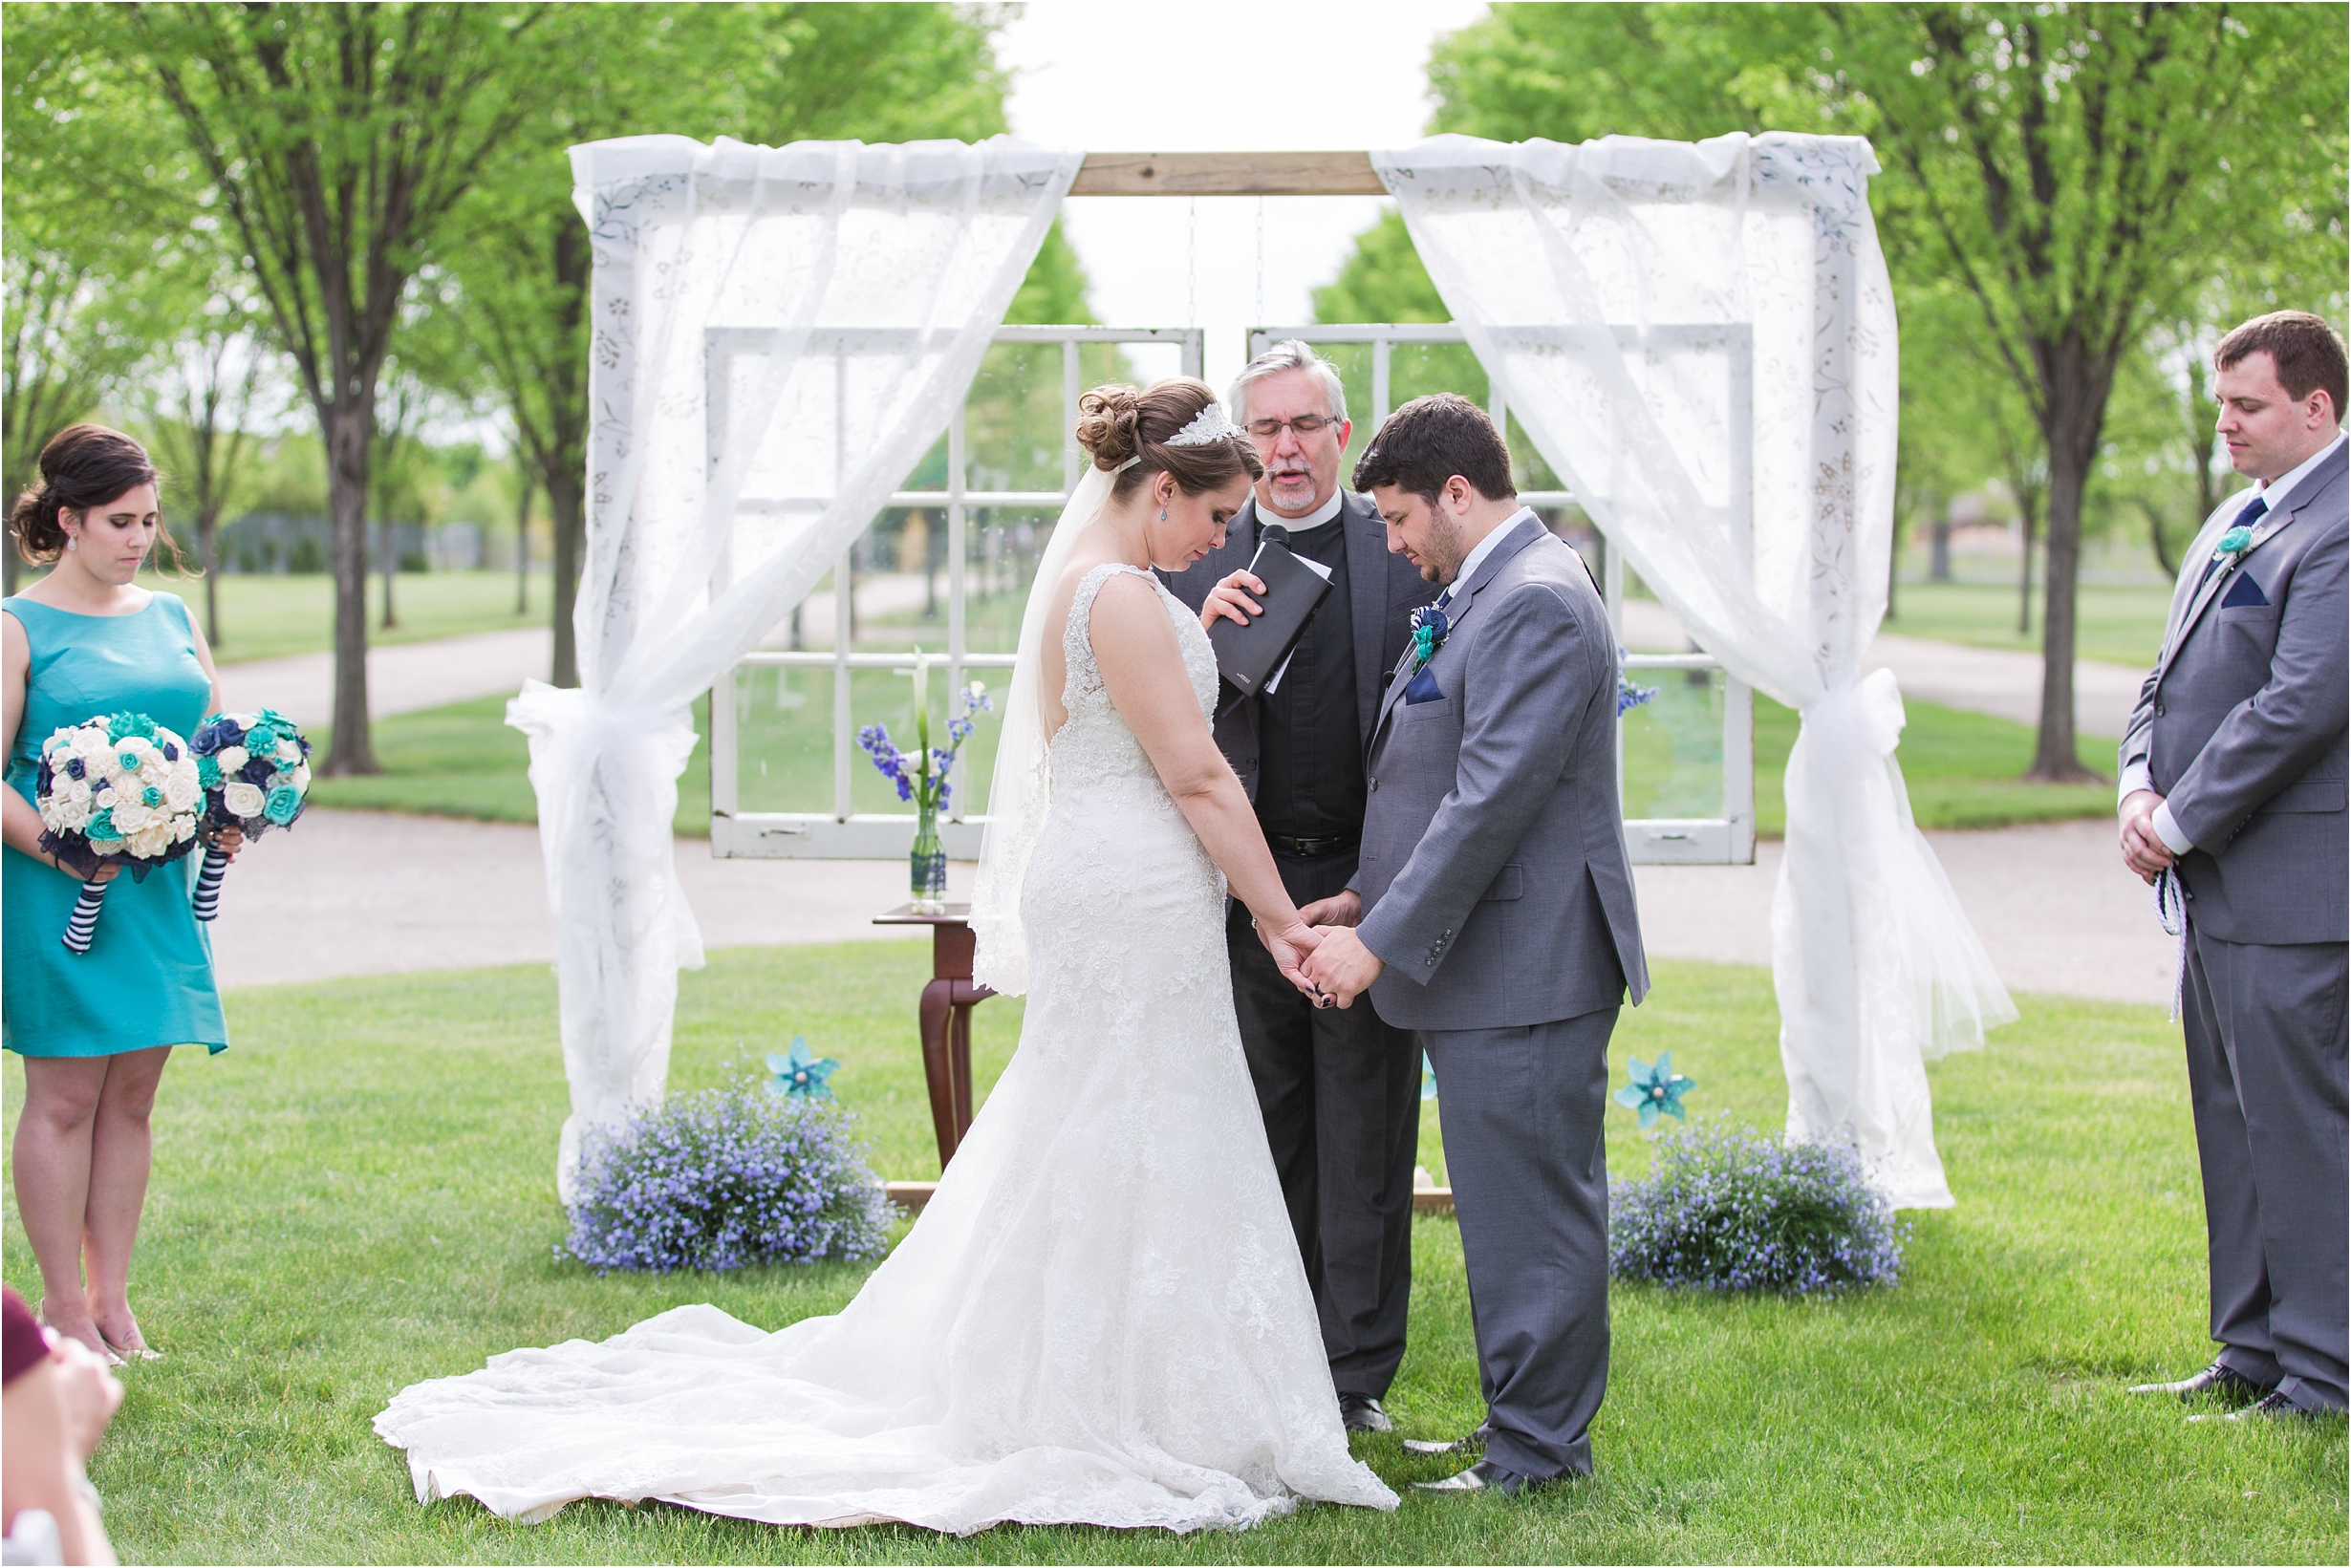 romantic-timeless-candid-wedding-photos-at-the-packard-proving-grounds-by-courtney-carolyn-photography_0007.jpg